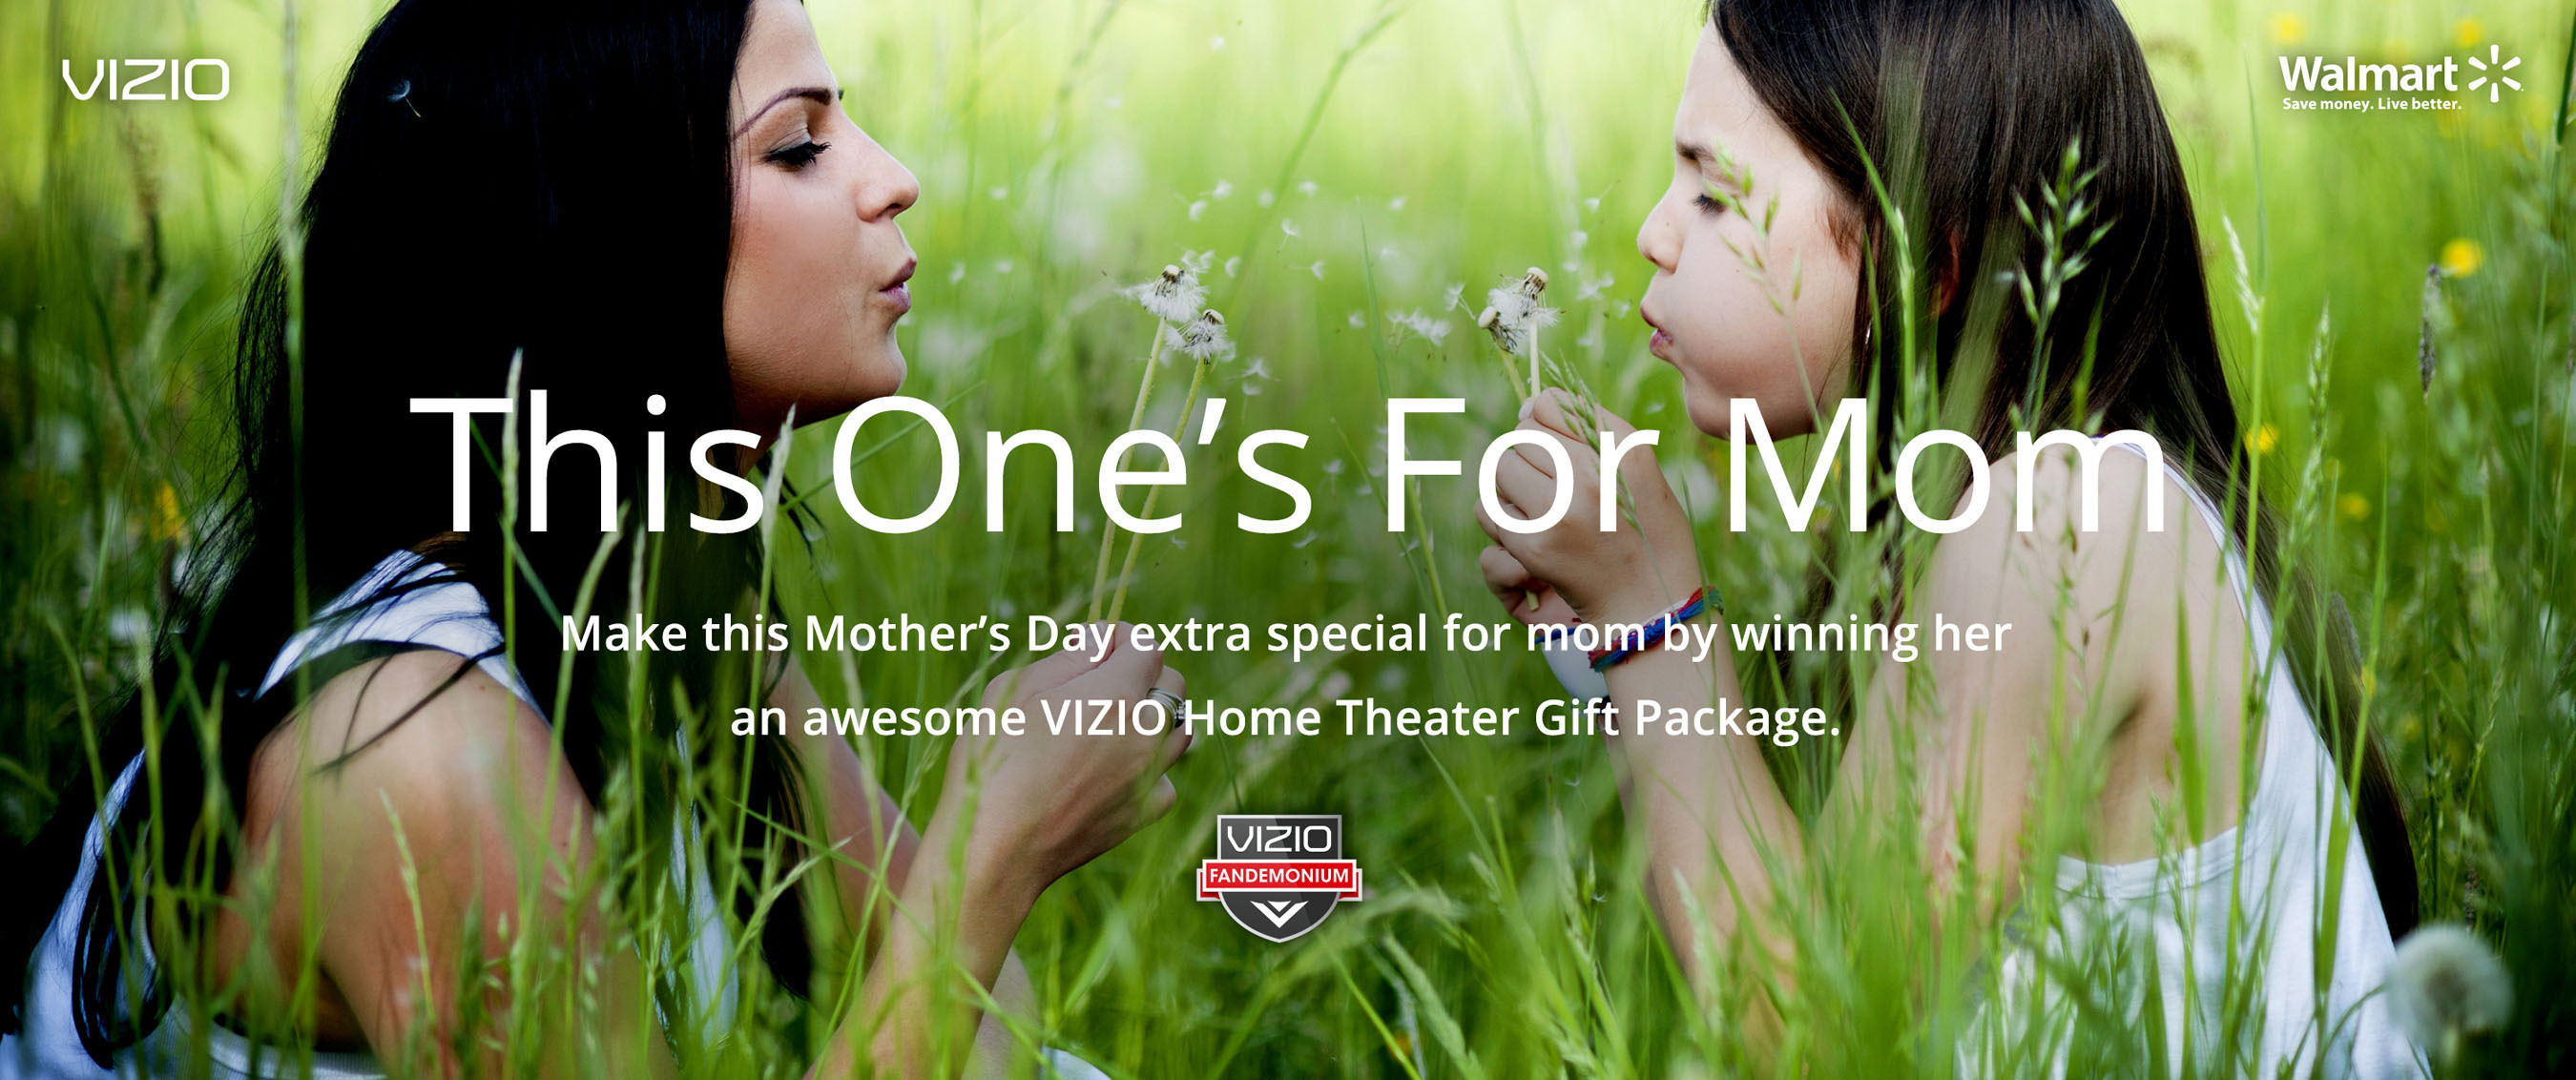 In partnership with Walmart, VIZIO announced today the "This One's For Mom" contest, giving family members the chance to pay tribute to their moms this Mother's Day. (PRNewsFoto/VIZIO, Inc.) (PRNewsFoto/VIZIO_ INC_)